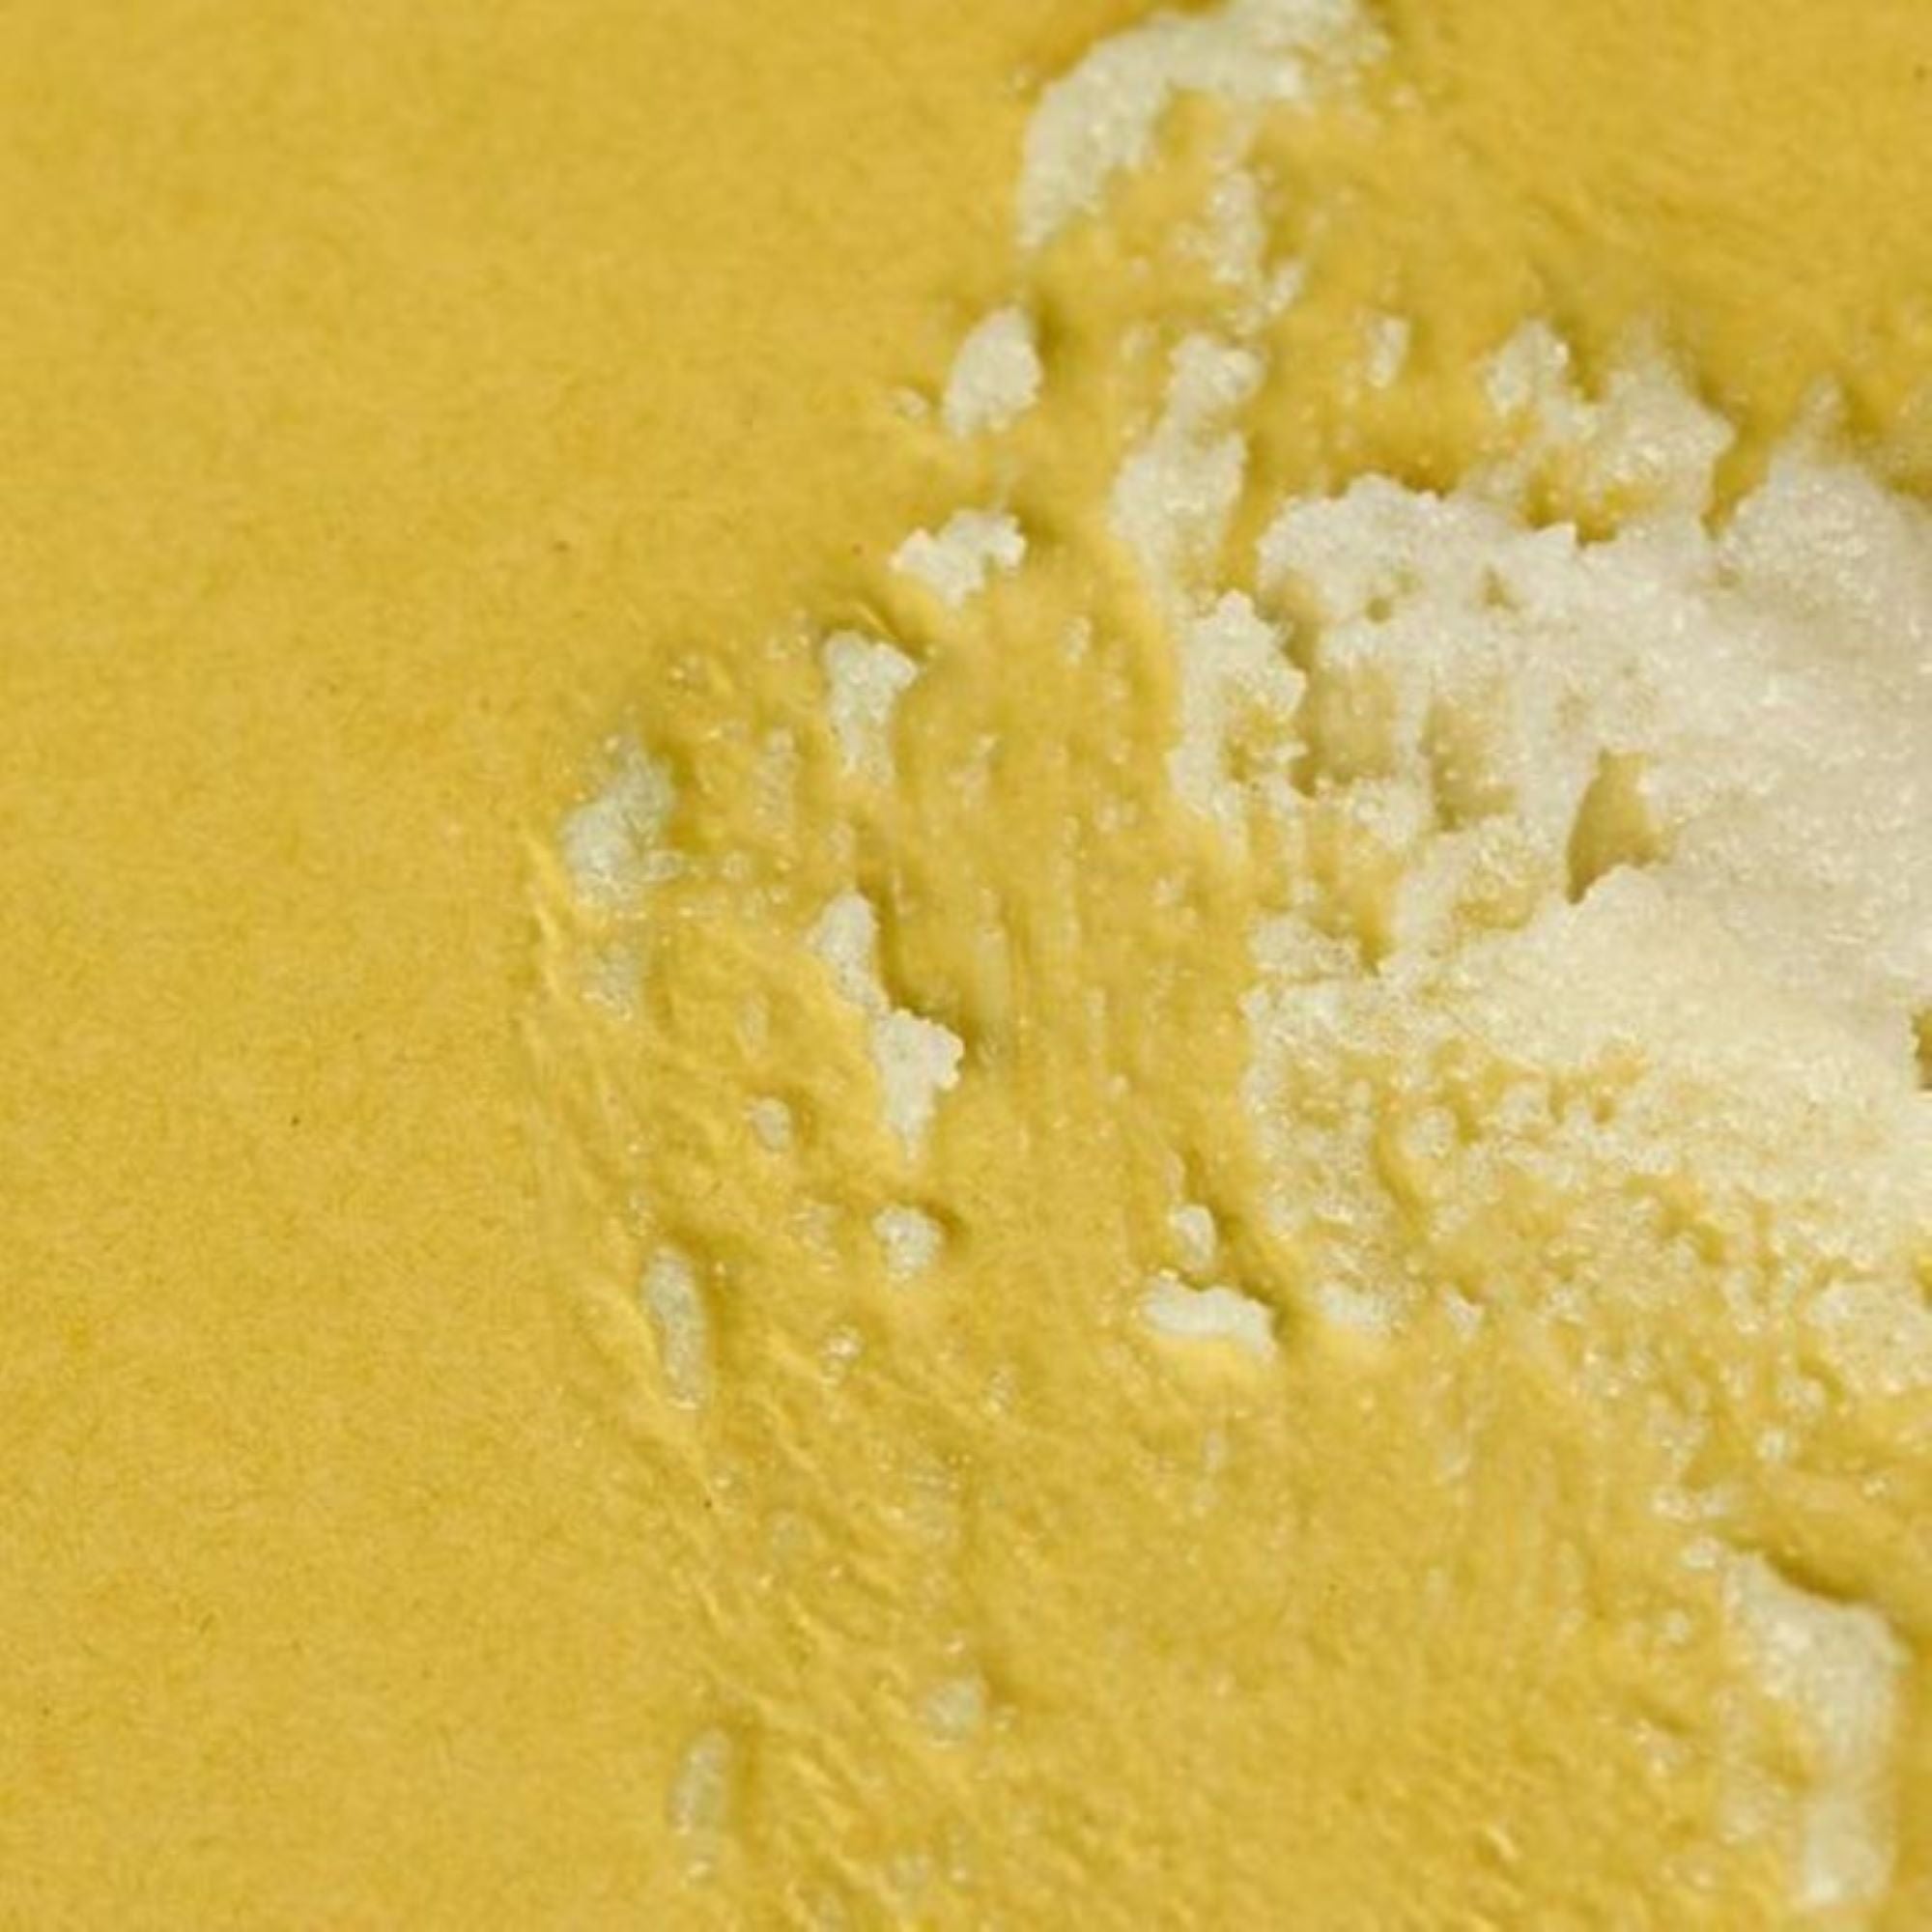 H. Honeycup body scrub smeared on yellow background to show sugar texture